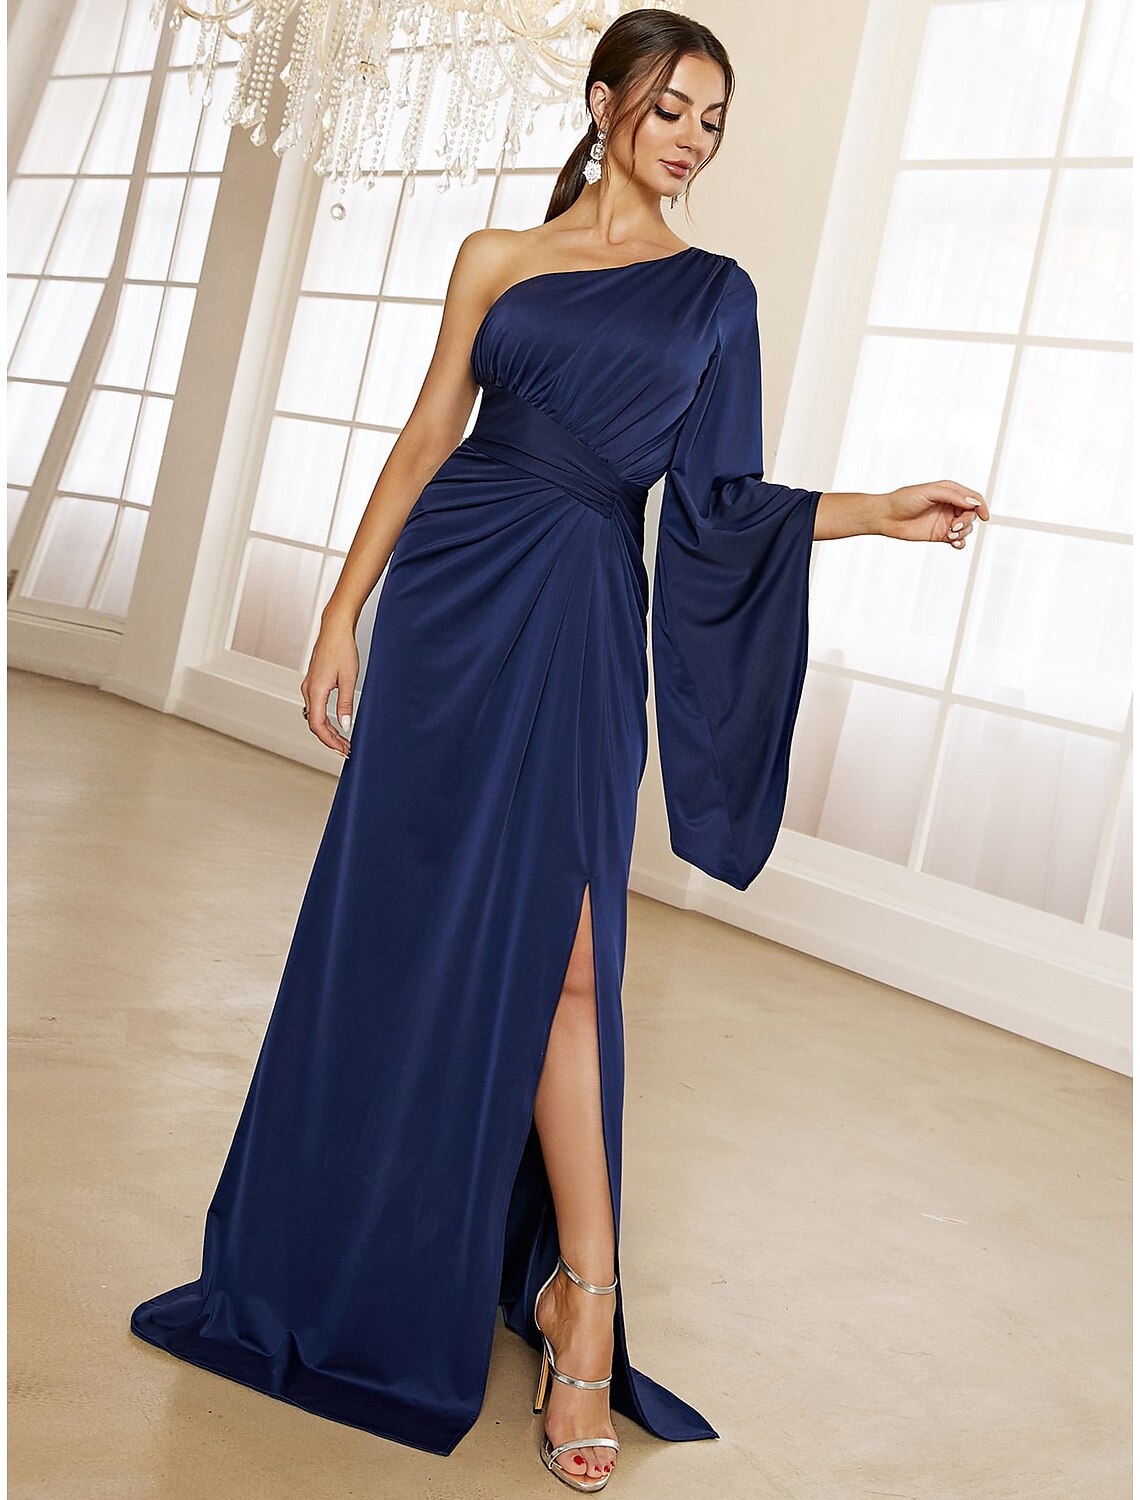 A-Line Evening Gown Elegant Dress Formal Fall Sweep / Brush Train Long Sleeve One Shoulder Stretch Fabric with Pleats Ruched Slit